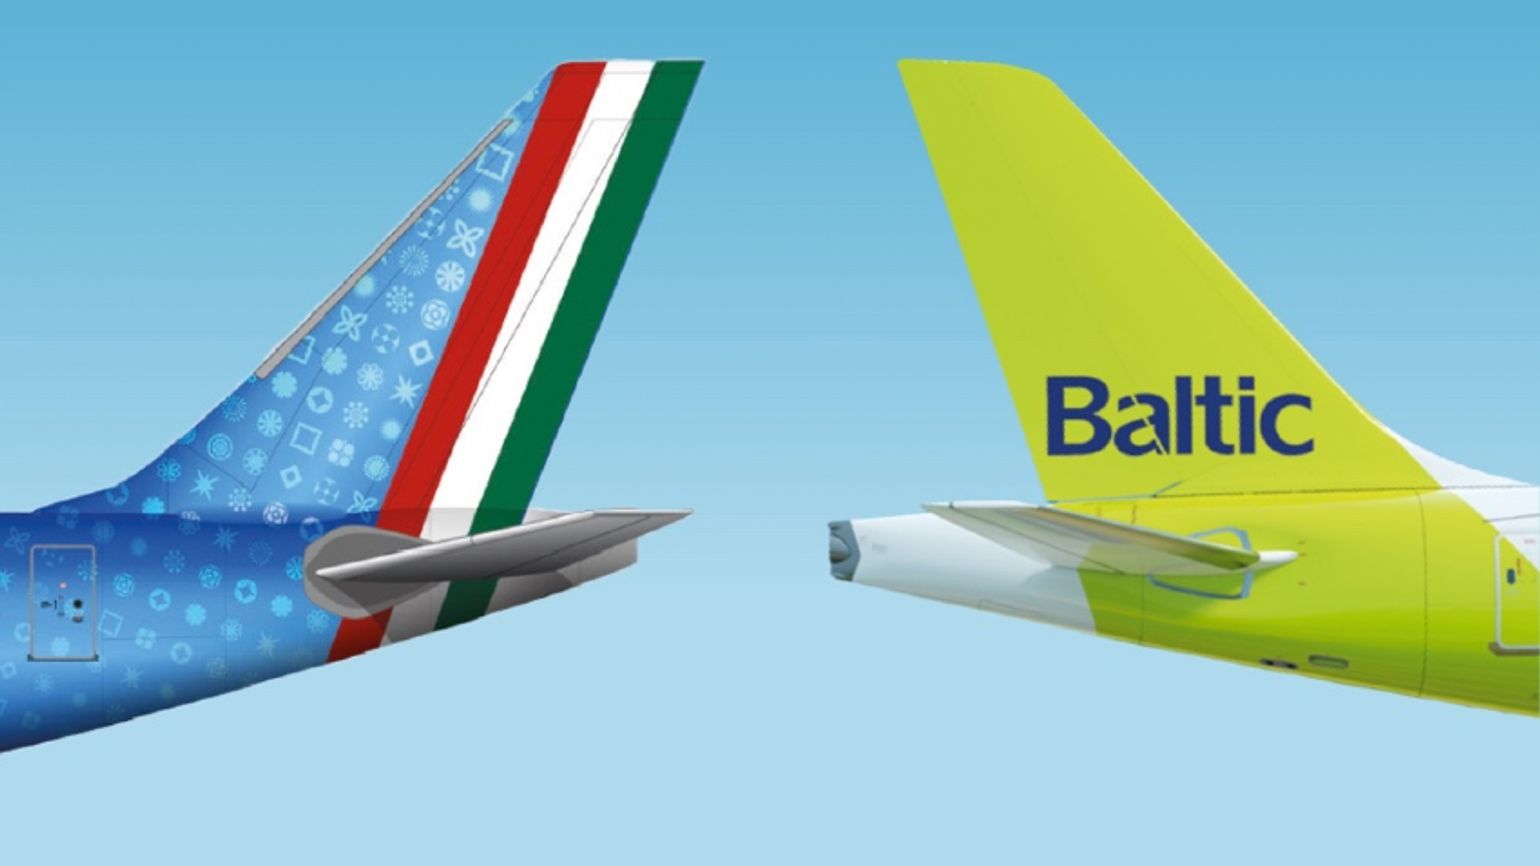 ITA Airways signs codeshare deal with airBaltic